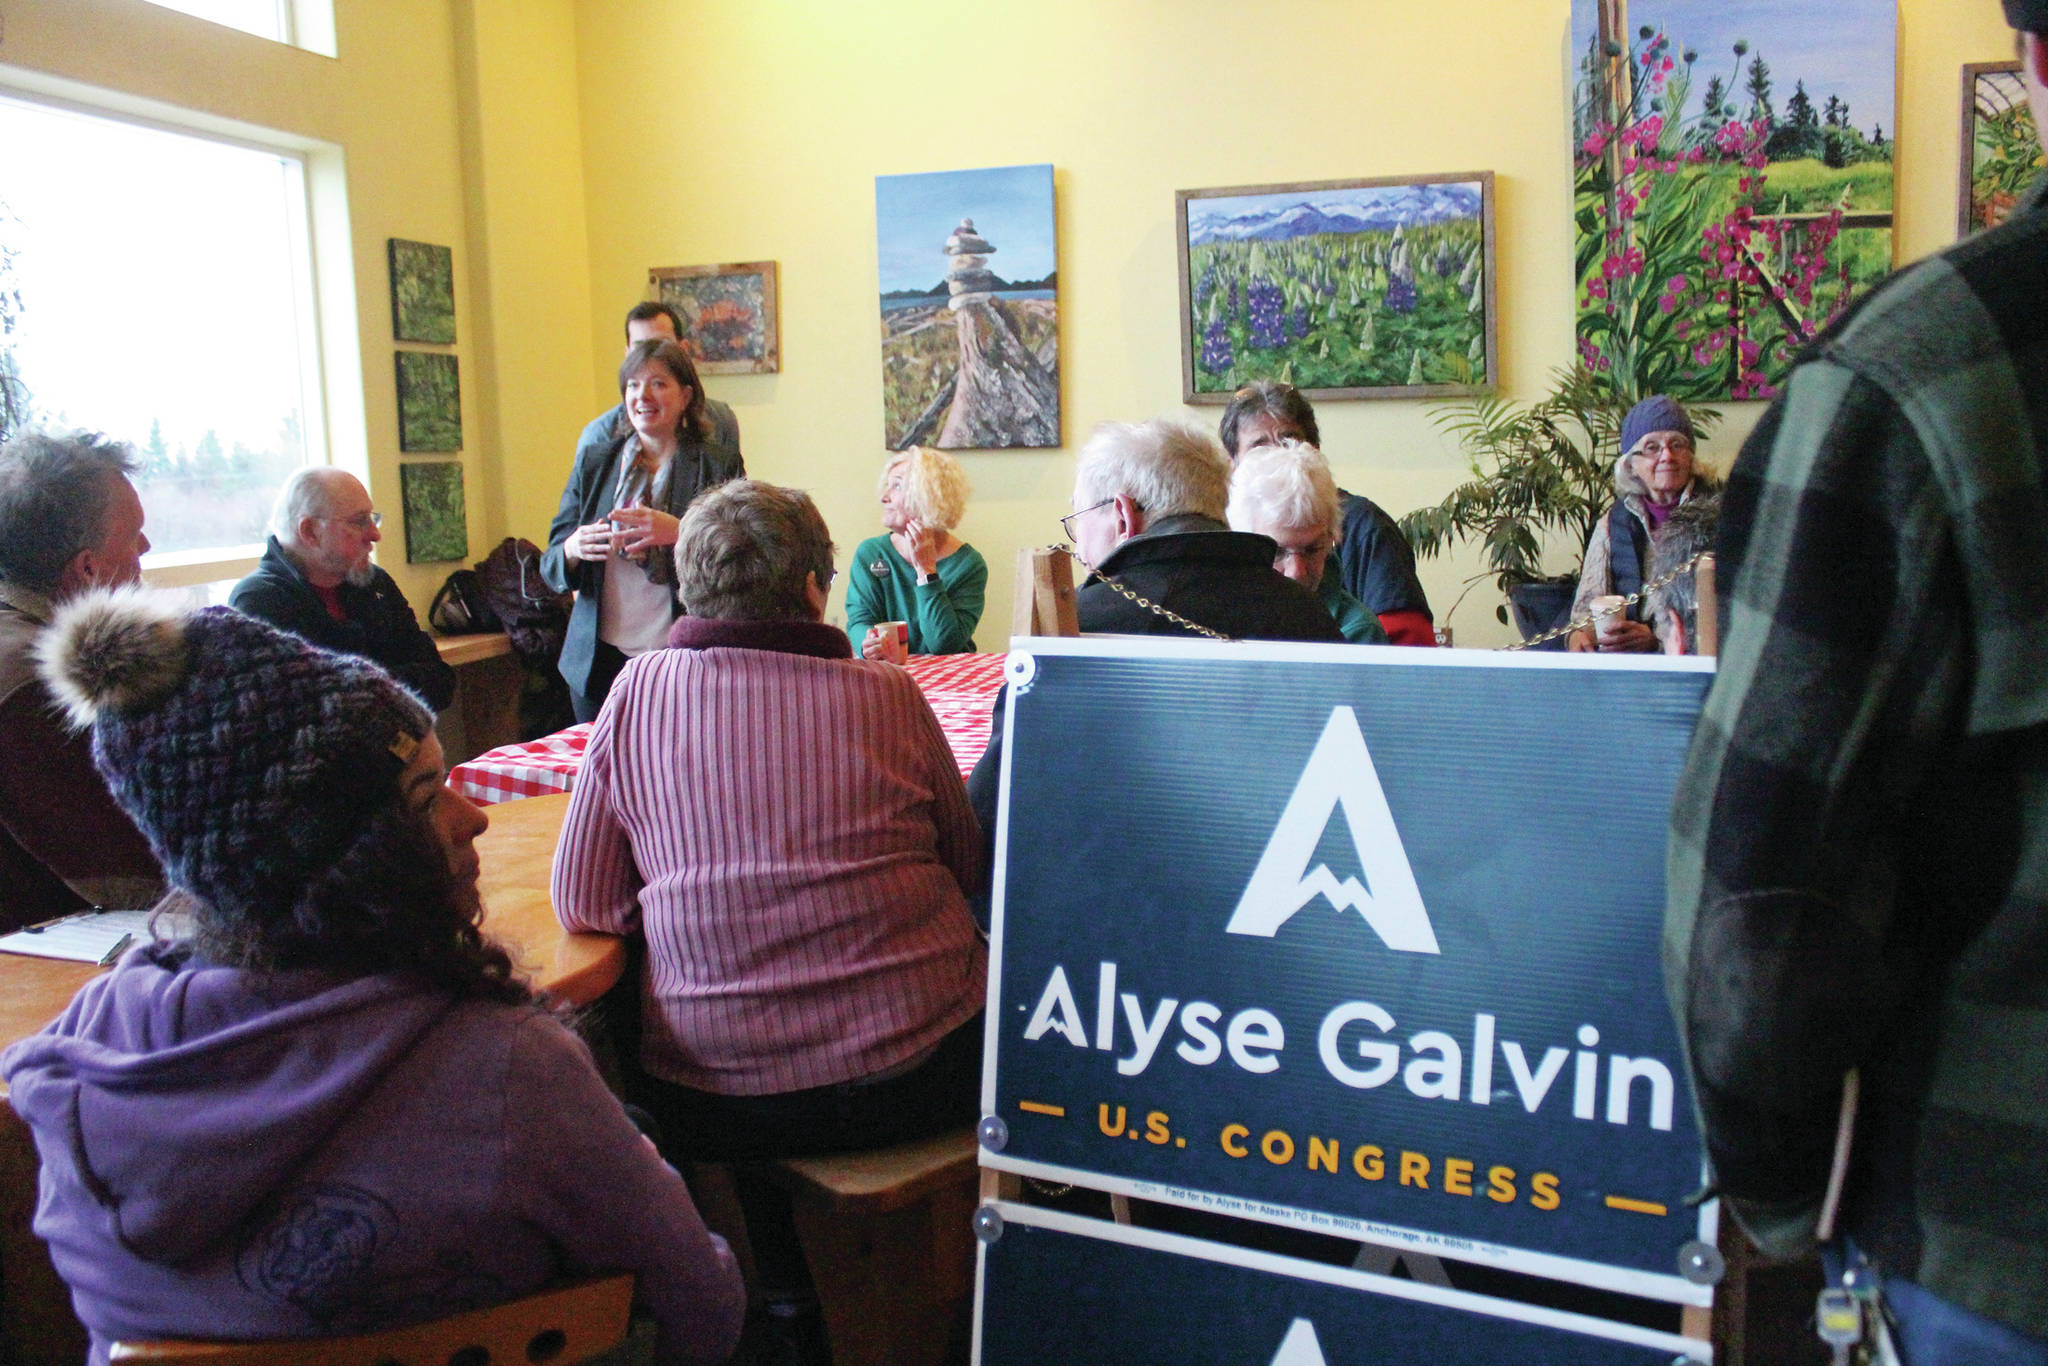 Community members listen to Alyse Galvin, who is running for the Alaska seat in the U.S. House of Representatives, speak during a meet and greet Sunday. Dec. 1, 2019 at K-Bay Caffee in Homer, Alaska. Galvin first ran to unseat Rep. Don Young in 2018. (Photo by Megan Pacer/Homer News)